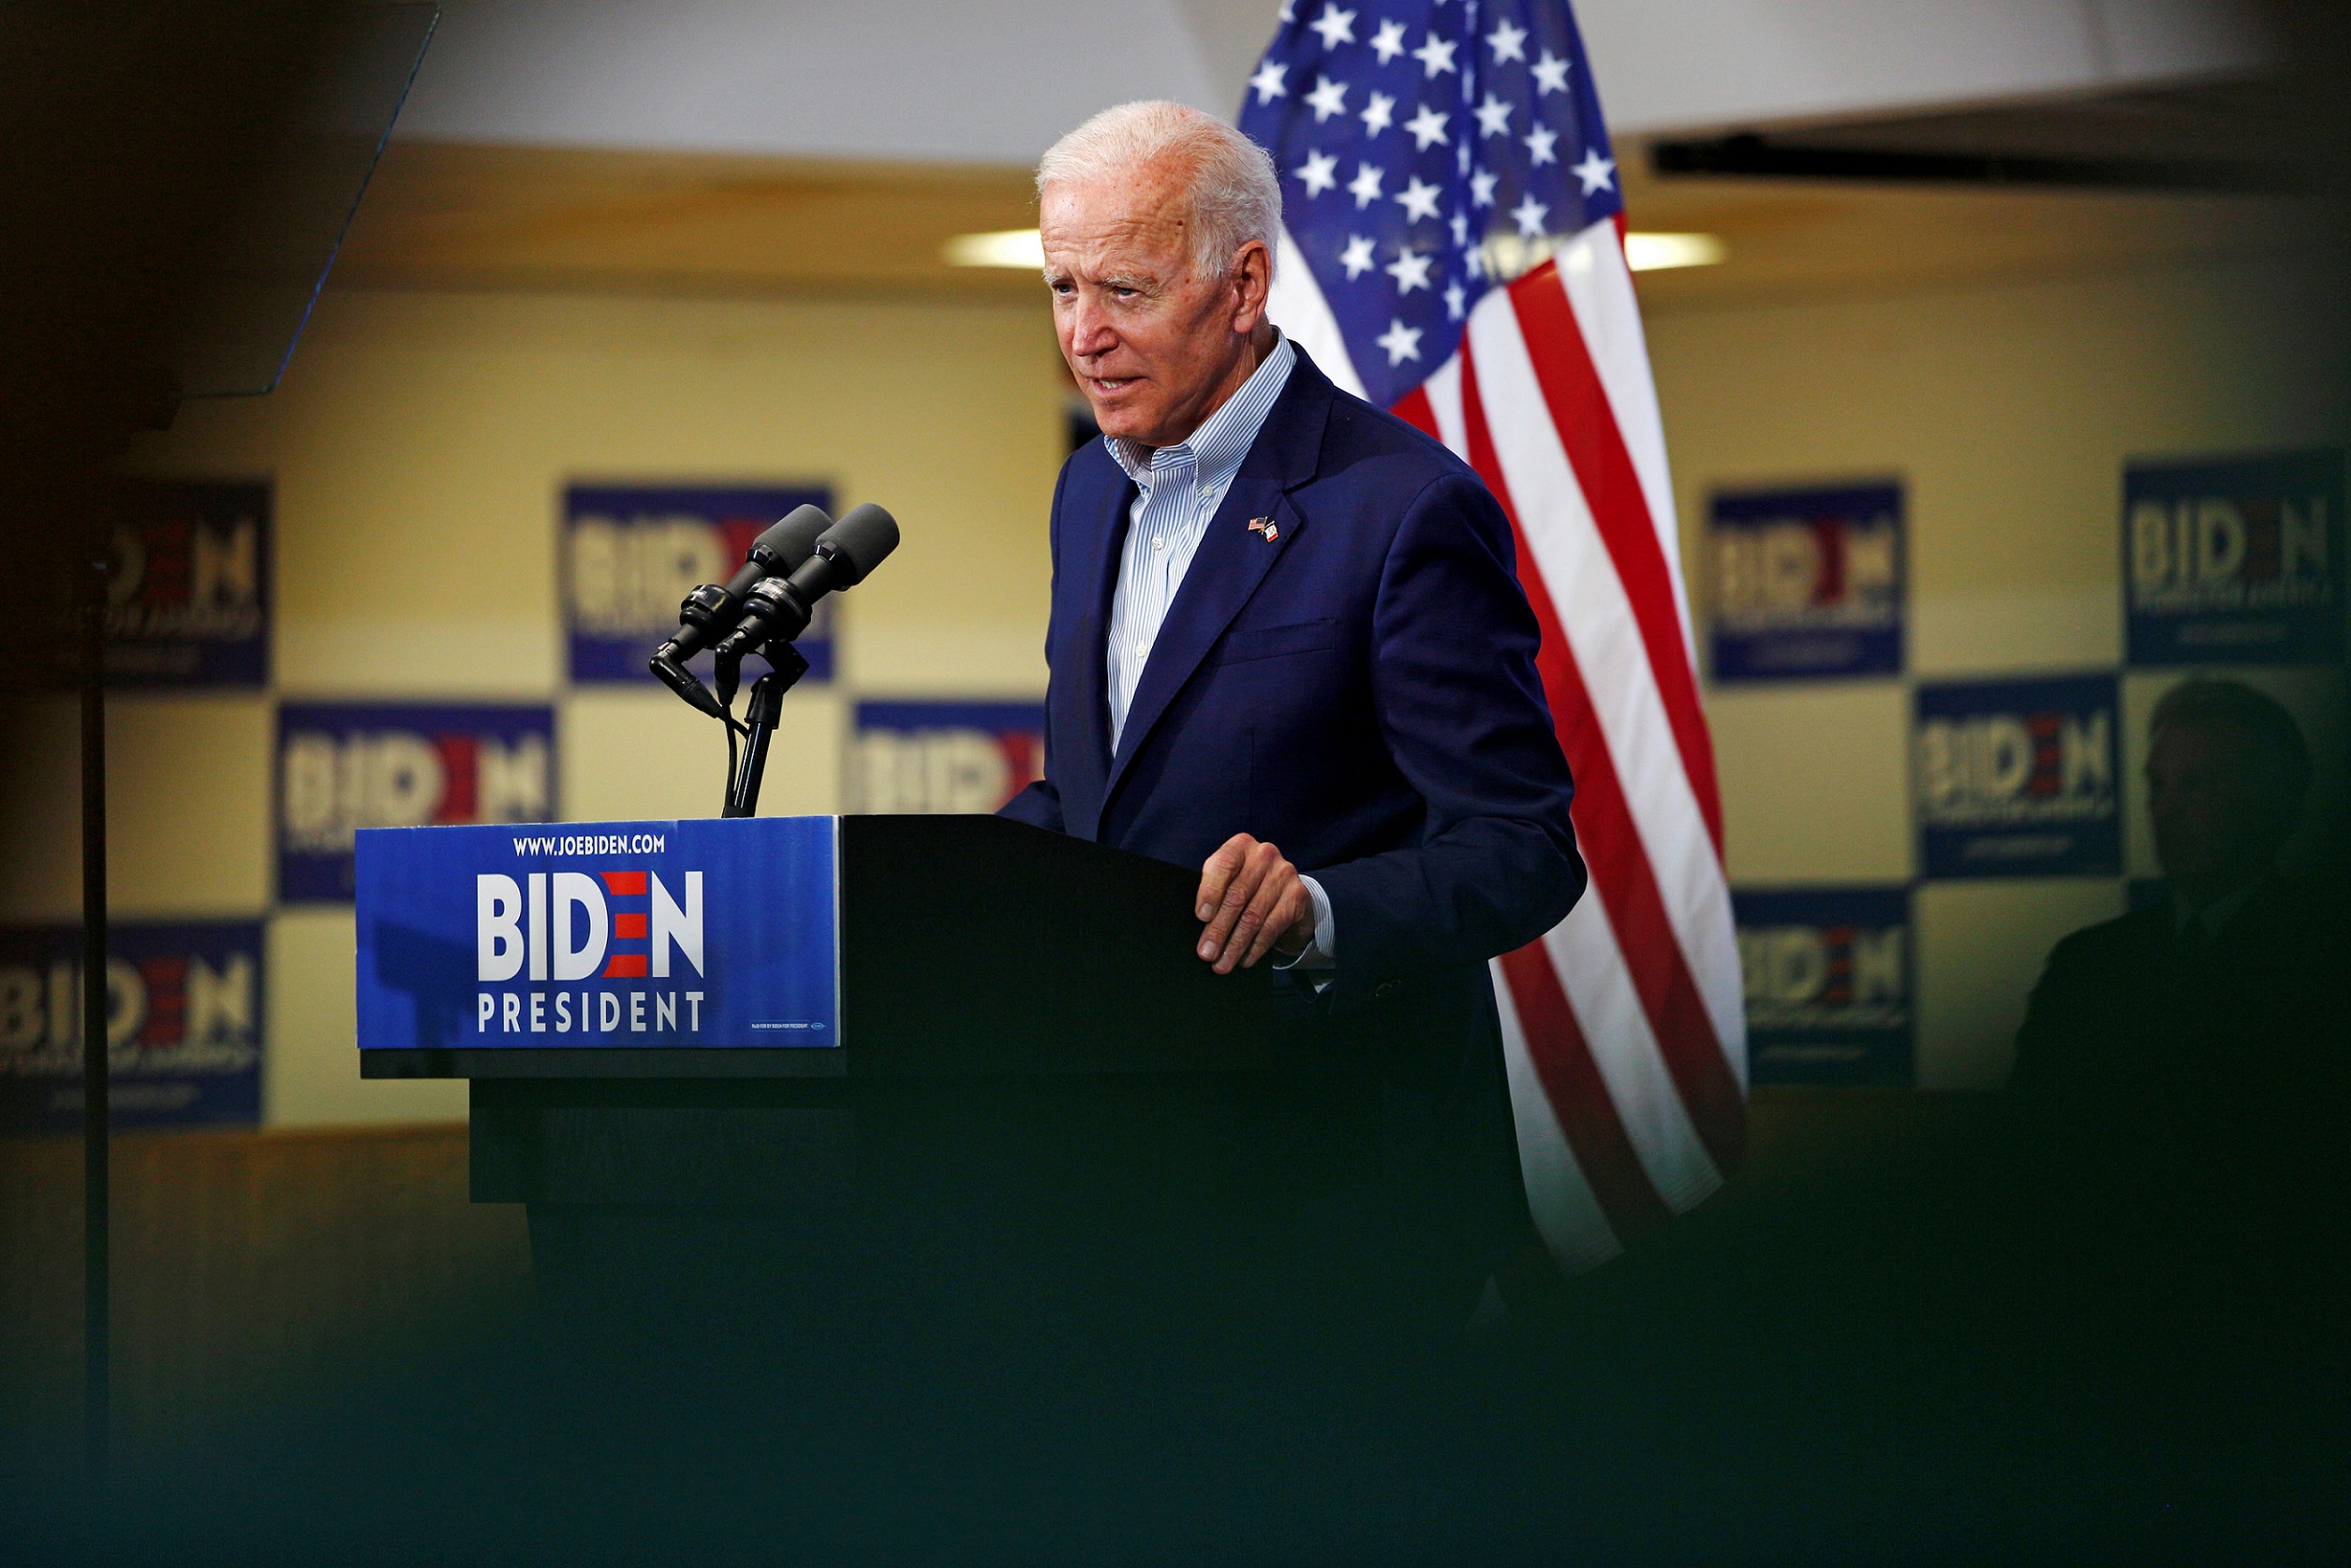 Can Biden hold onto his lead?